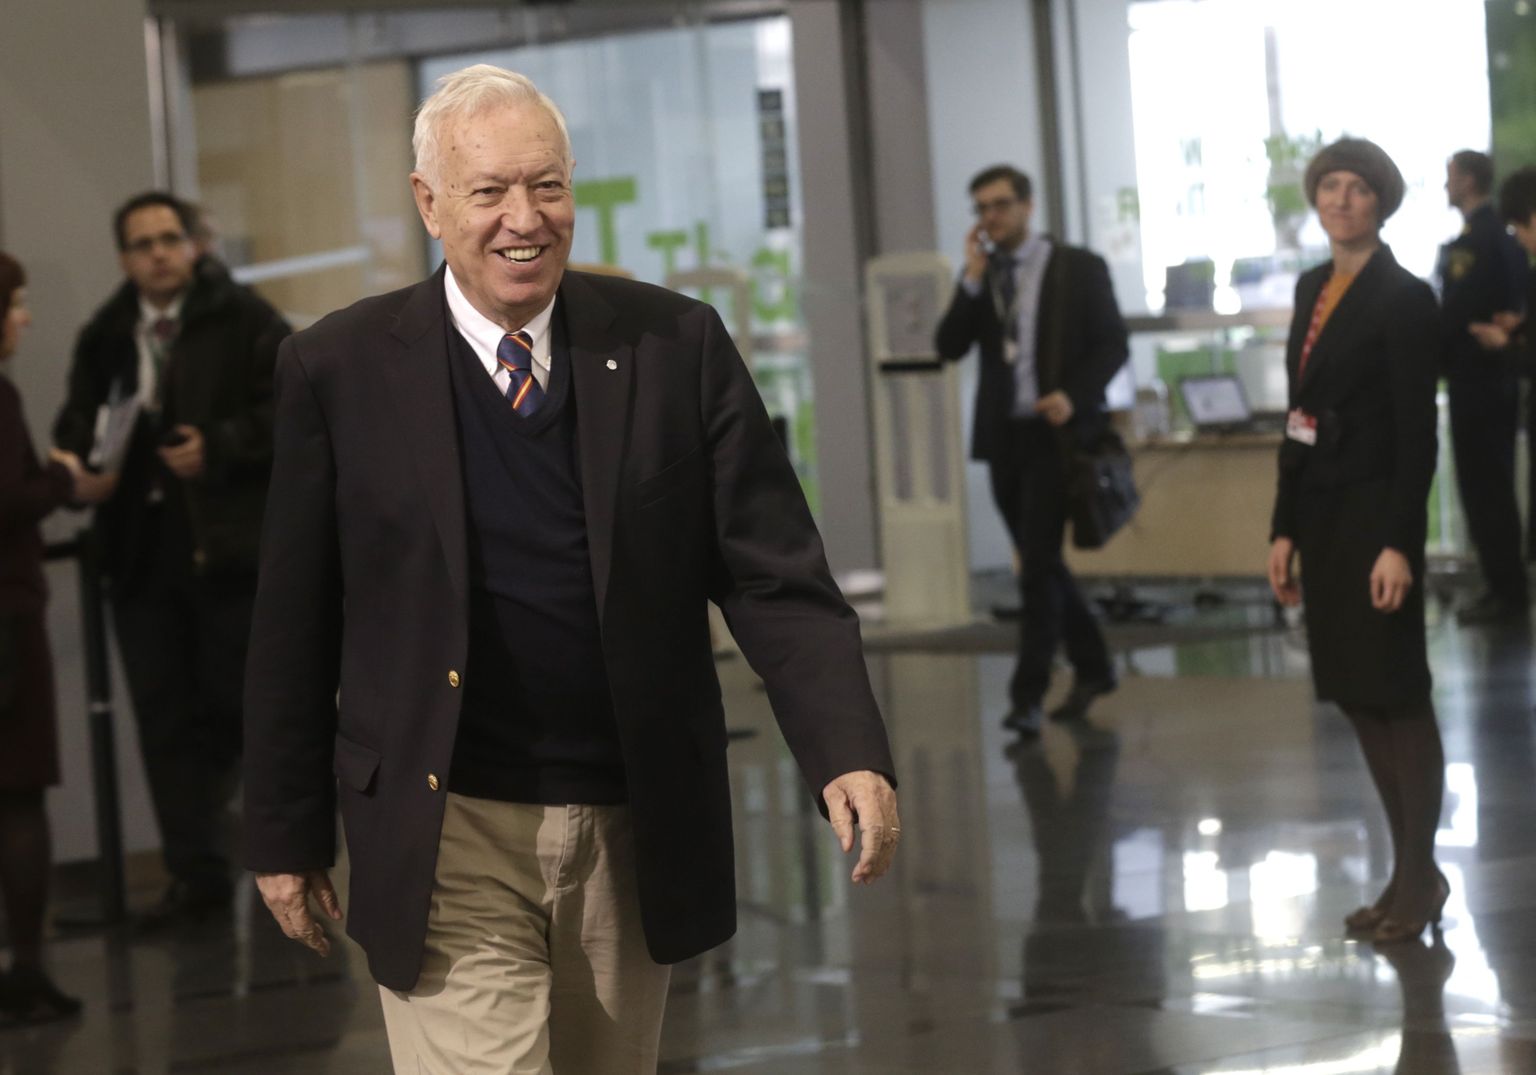 Spain's Minister of Foreign Affairs Jose Manuel Garcia-Margallo arrives at the informal European Union Mnisters of Foreign Affairs meeting (Gymnich) in Riga March 6, 2015. REUTERS/Ints Kalnins (LATVIA - Tags: POLITICS)